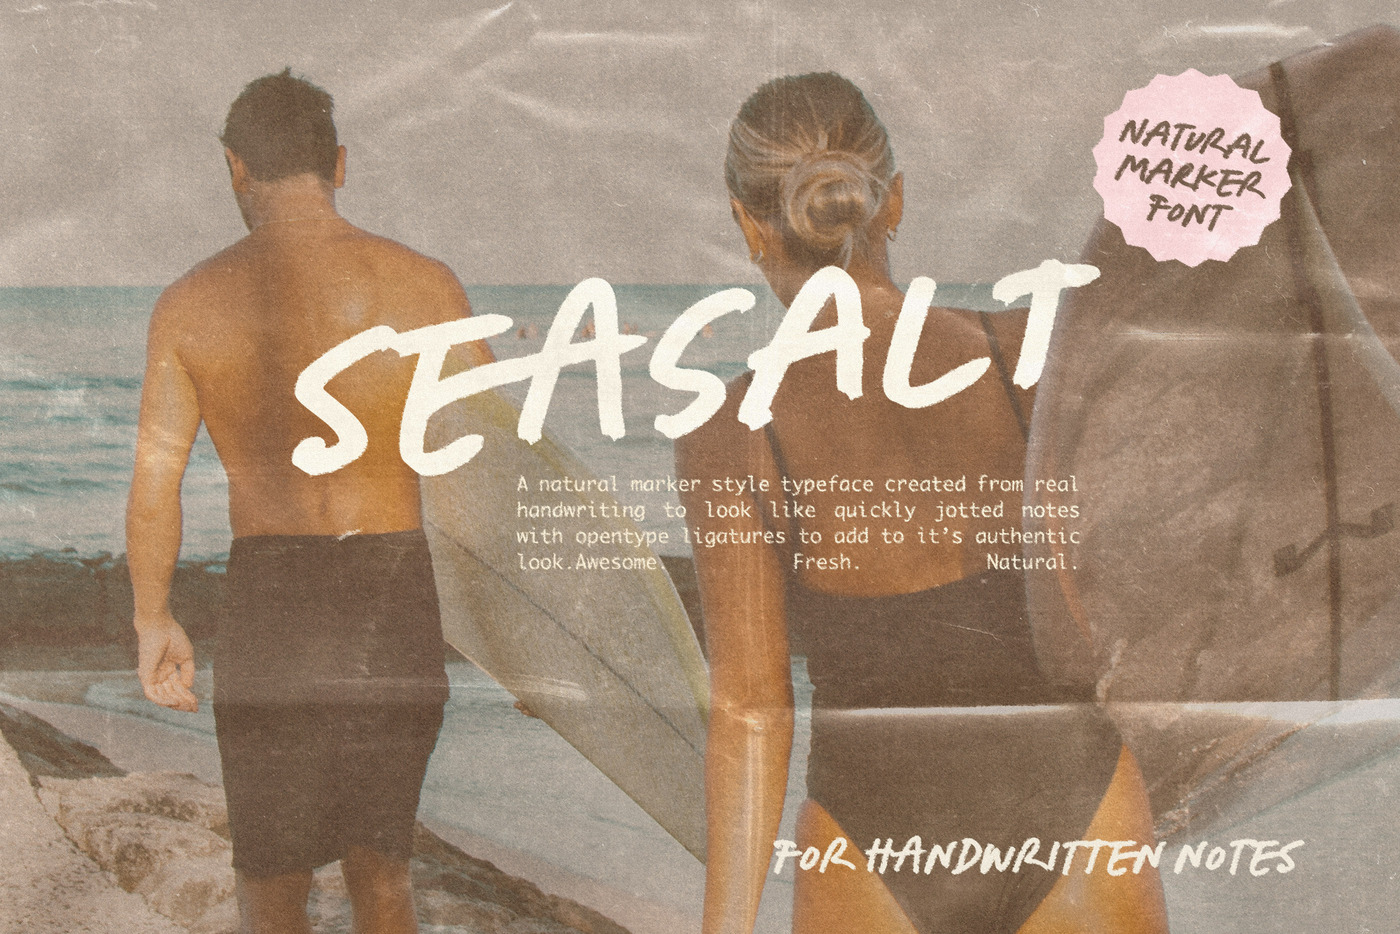 Seasalt - Casual Marker Typeface main product image by Nicky Laatz